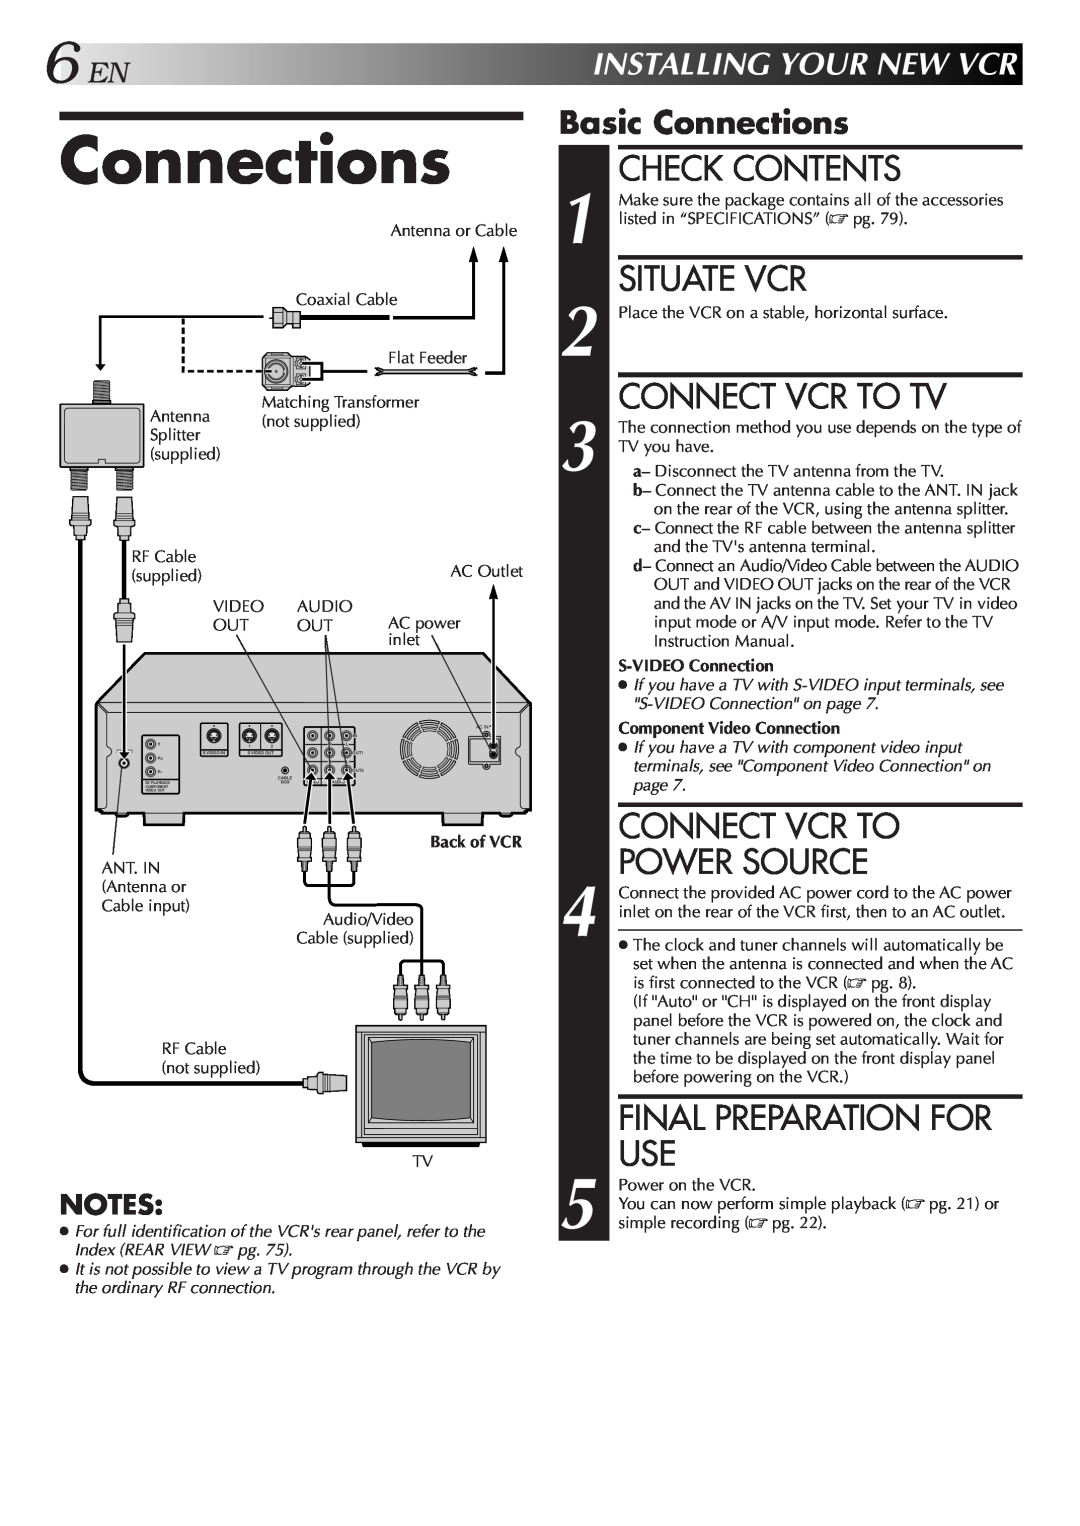 JVC Model HR-DVS1U Connections, Check Contents, Situate Vcr, Connect Vcr To Tv, Connect Vcr To Power Source, Back of VCR 